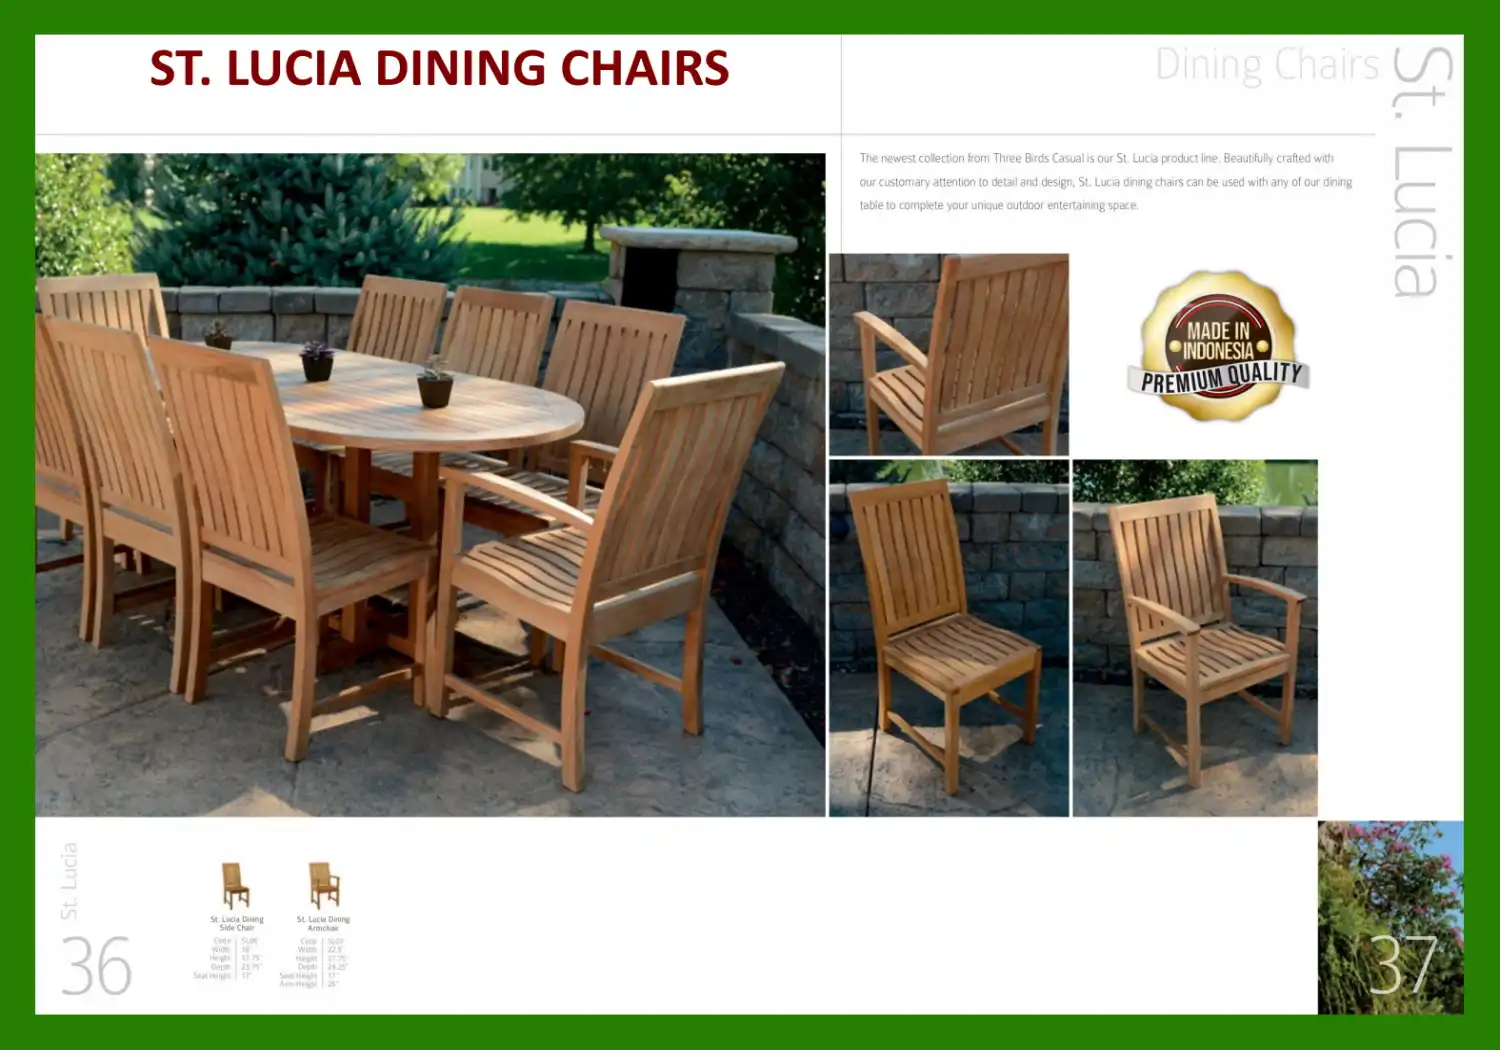 ST. LUCIA DINING CHAIRS